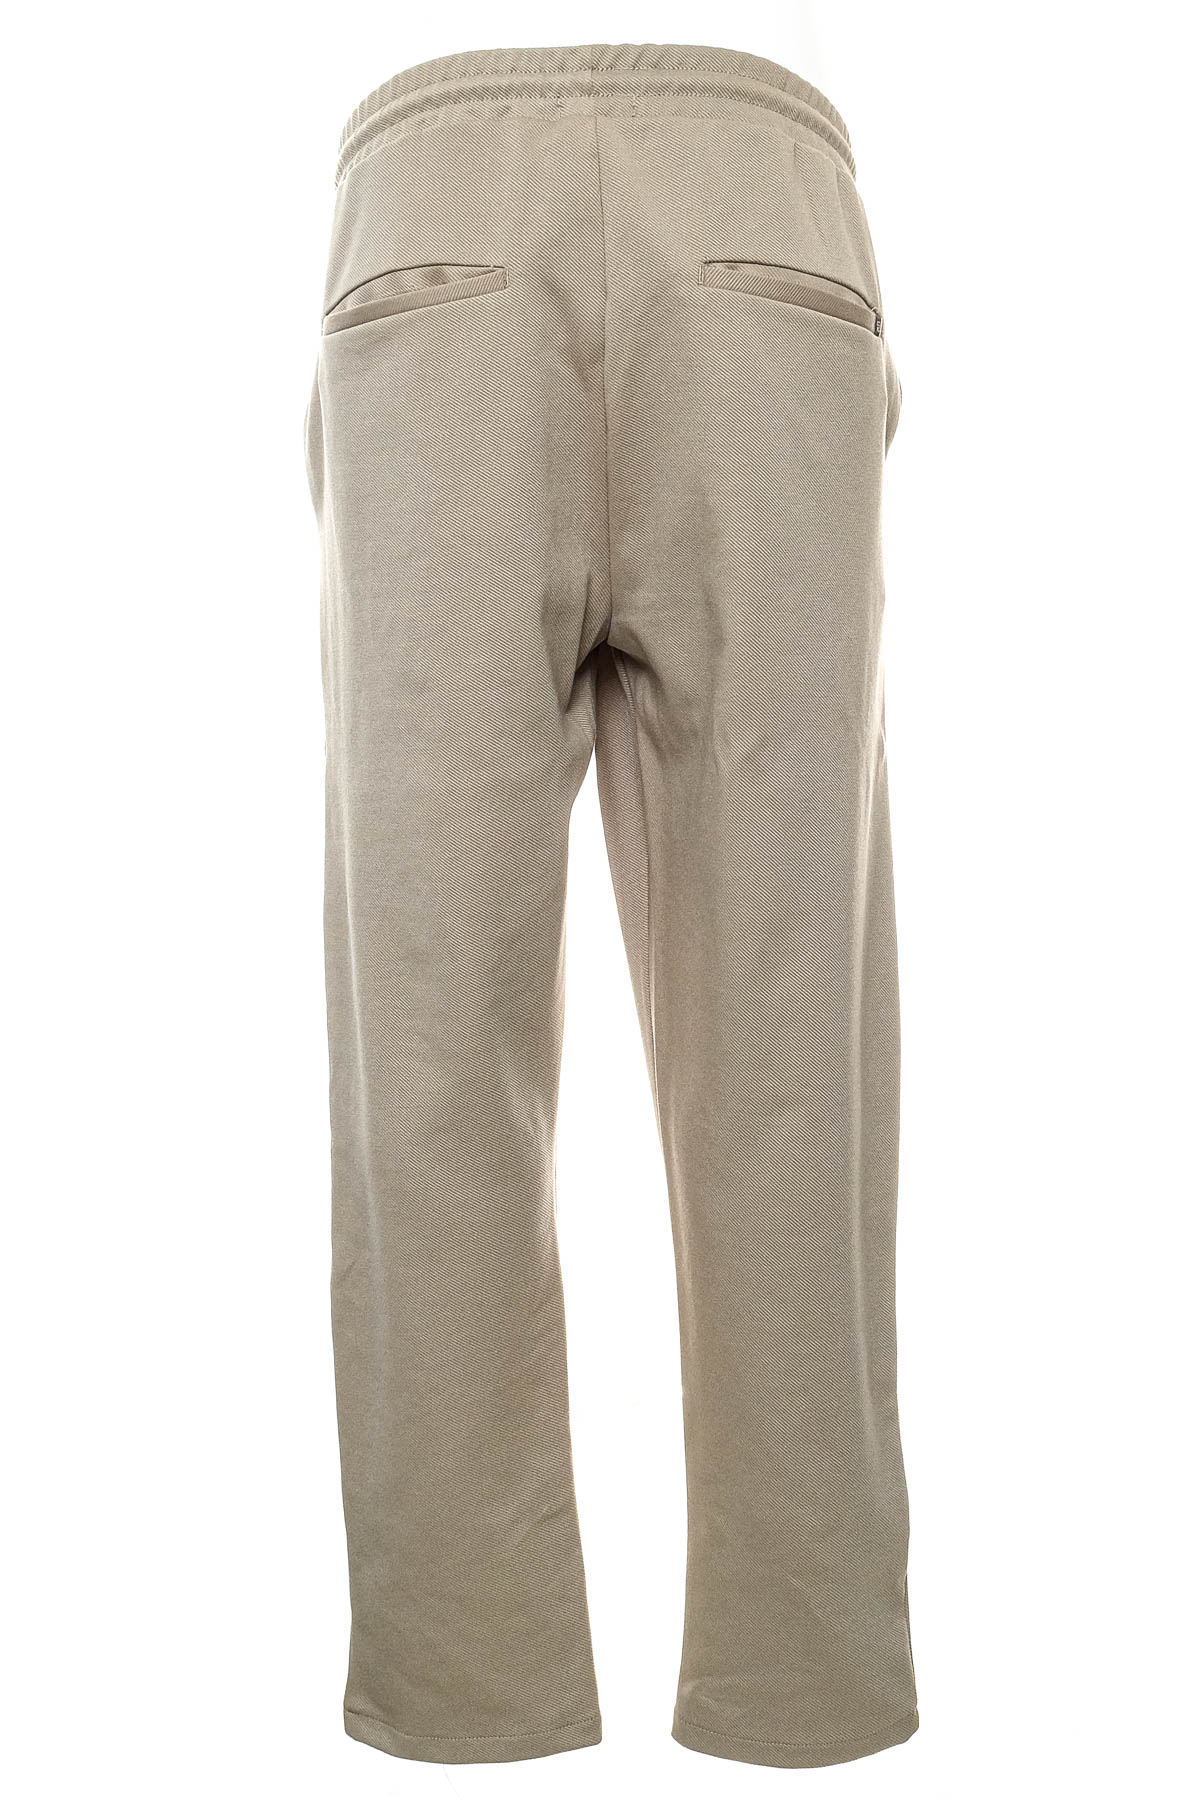 Men's trousers - ICONO by SMOG - 1